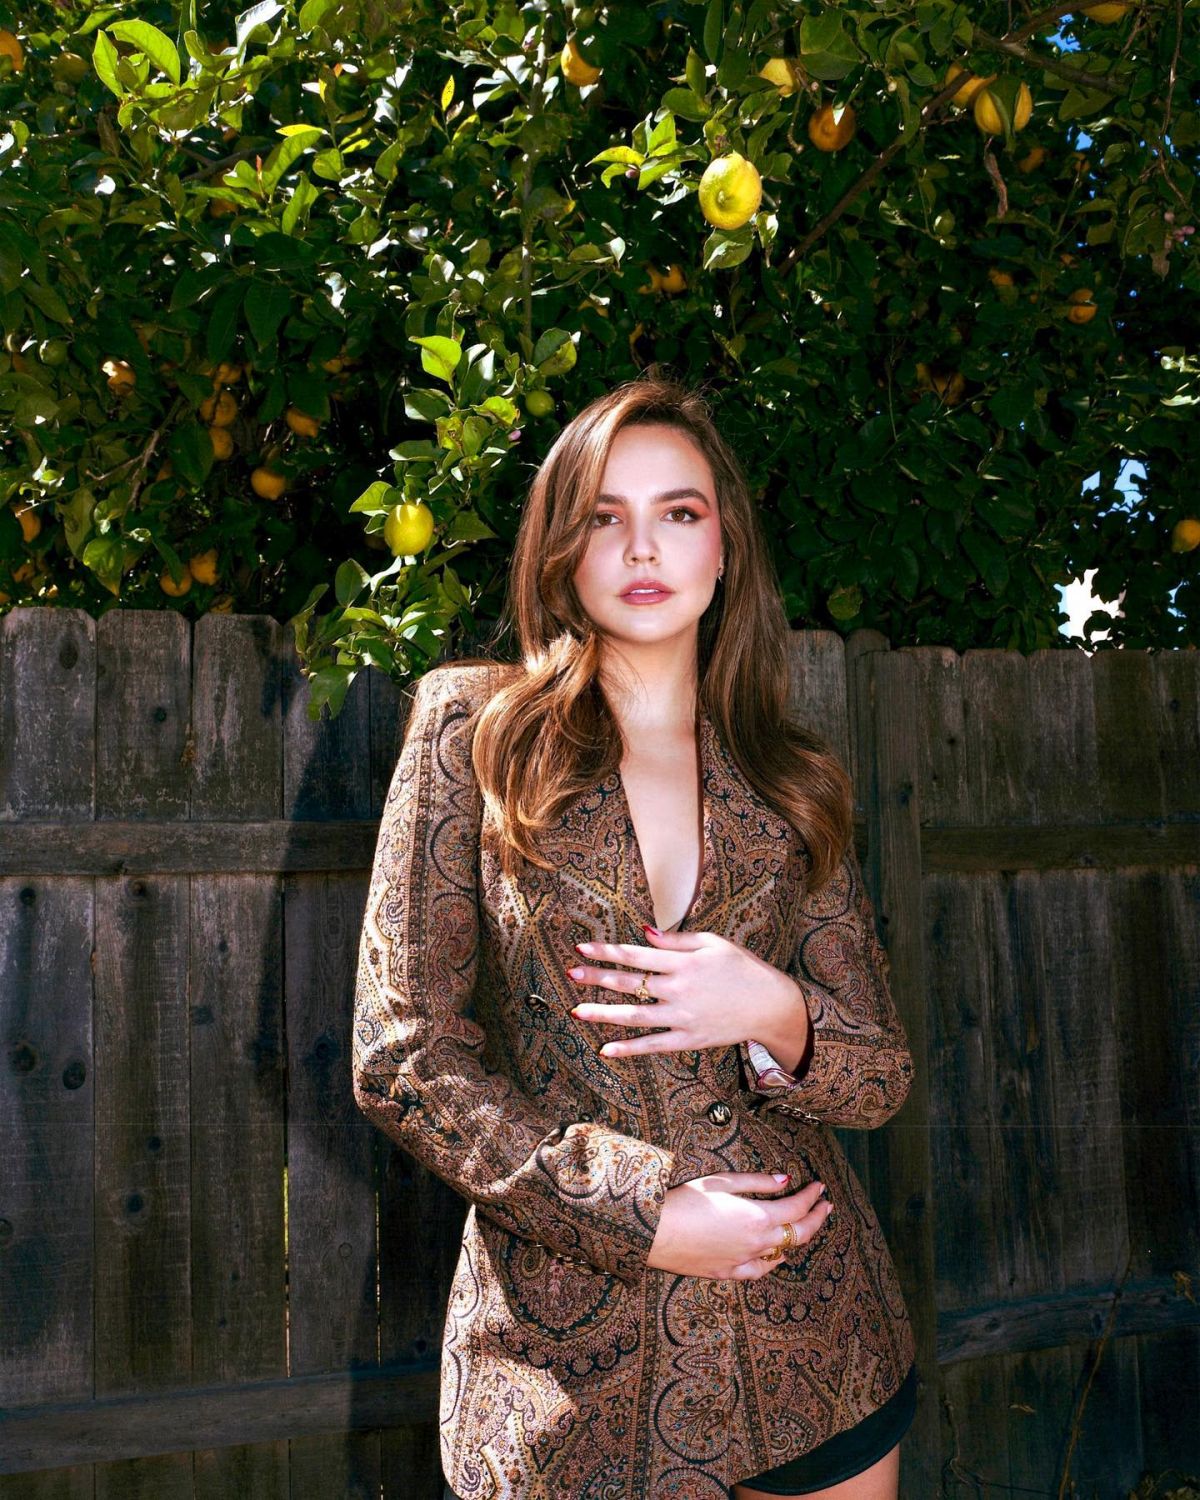 BAILEE MADISON at a Photoshoot, March 2021.